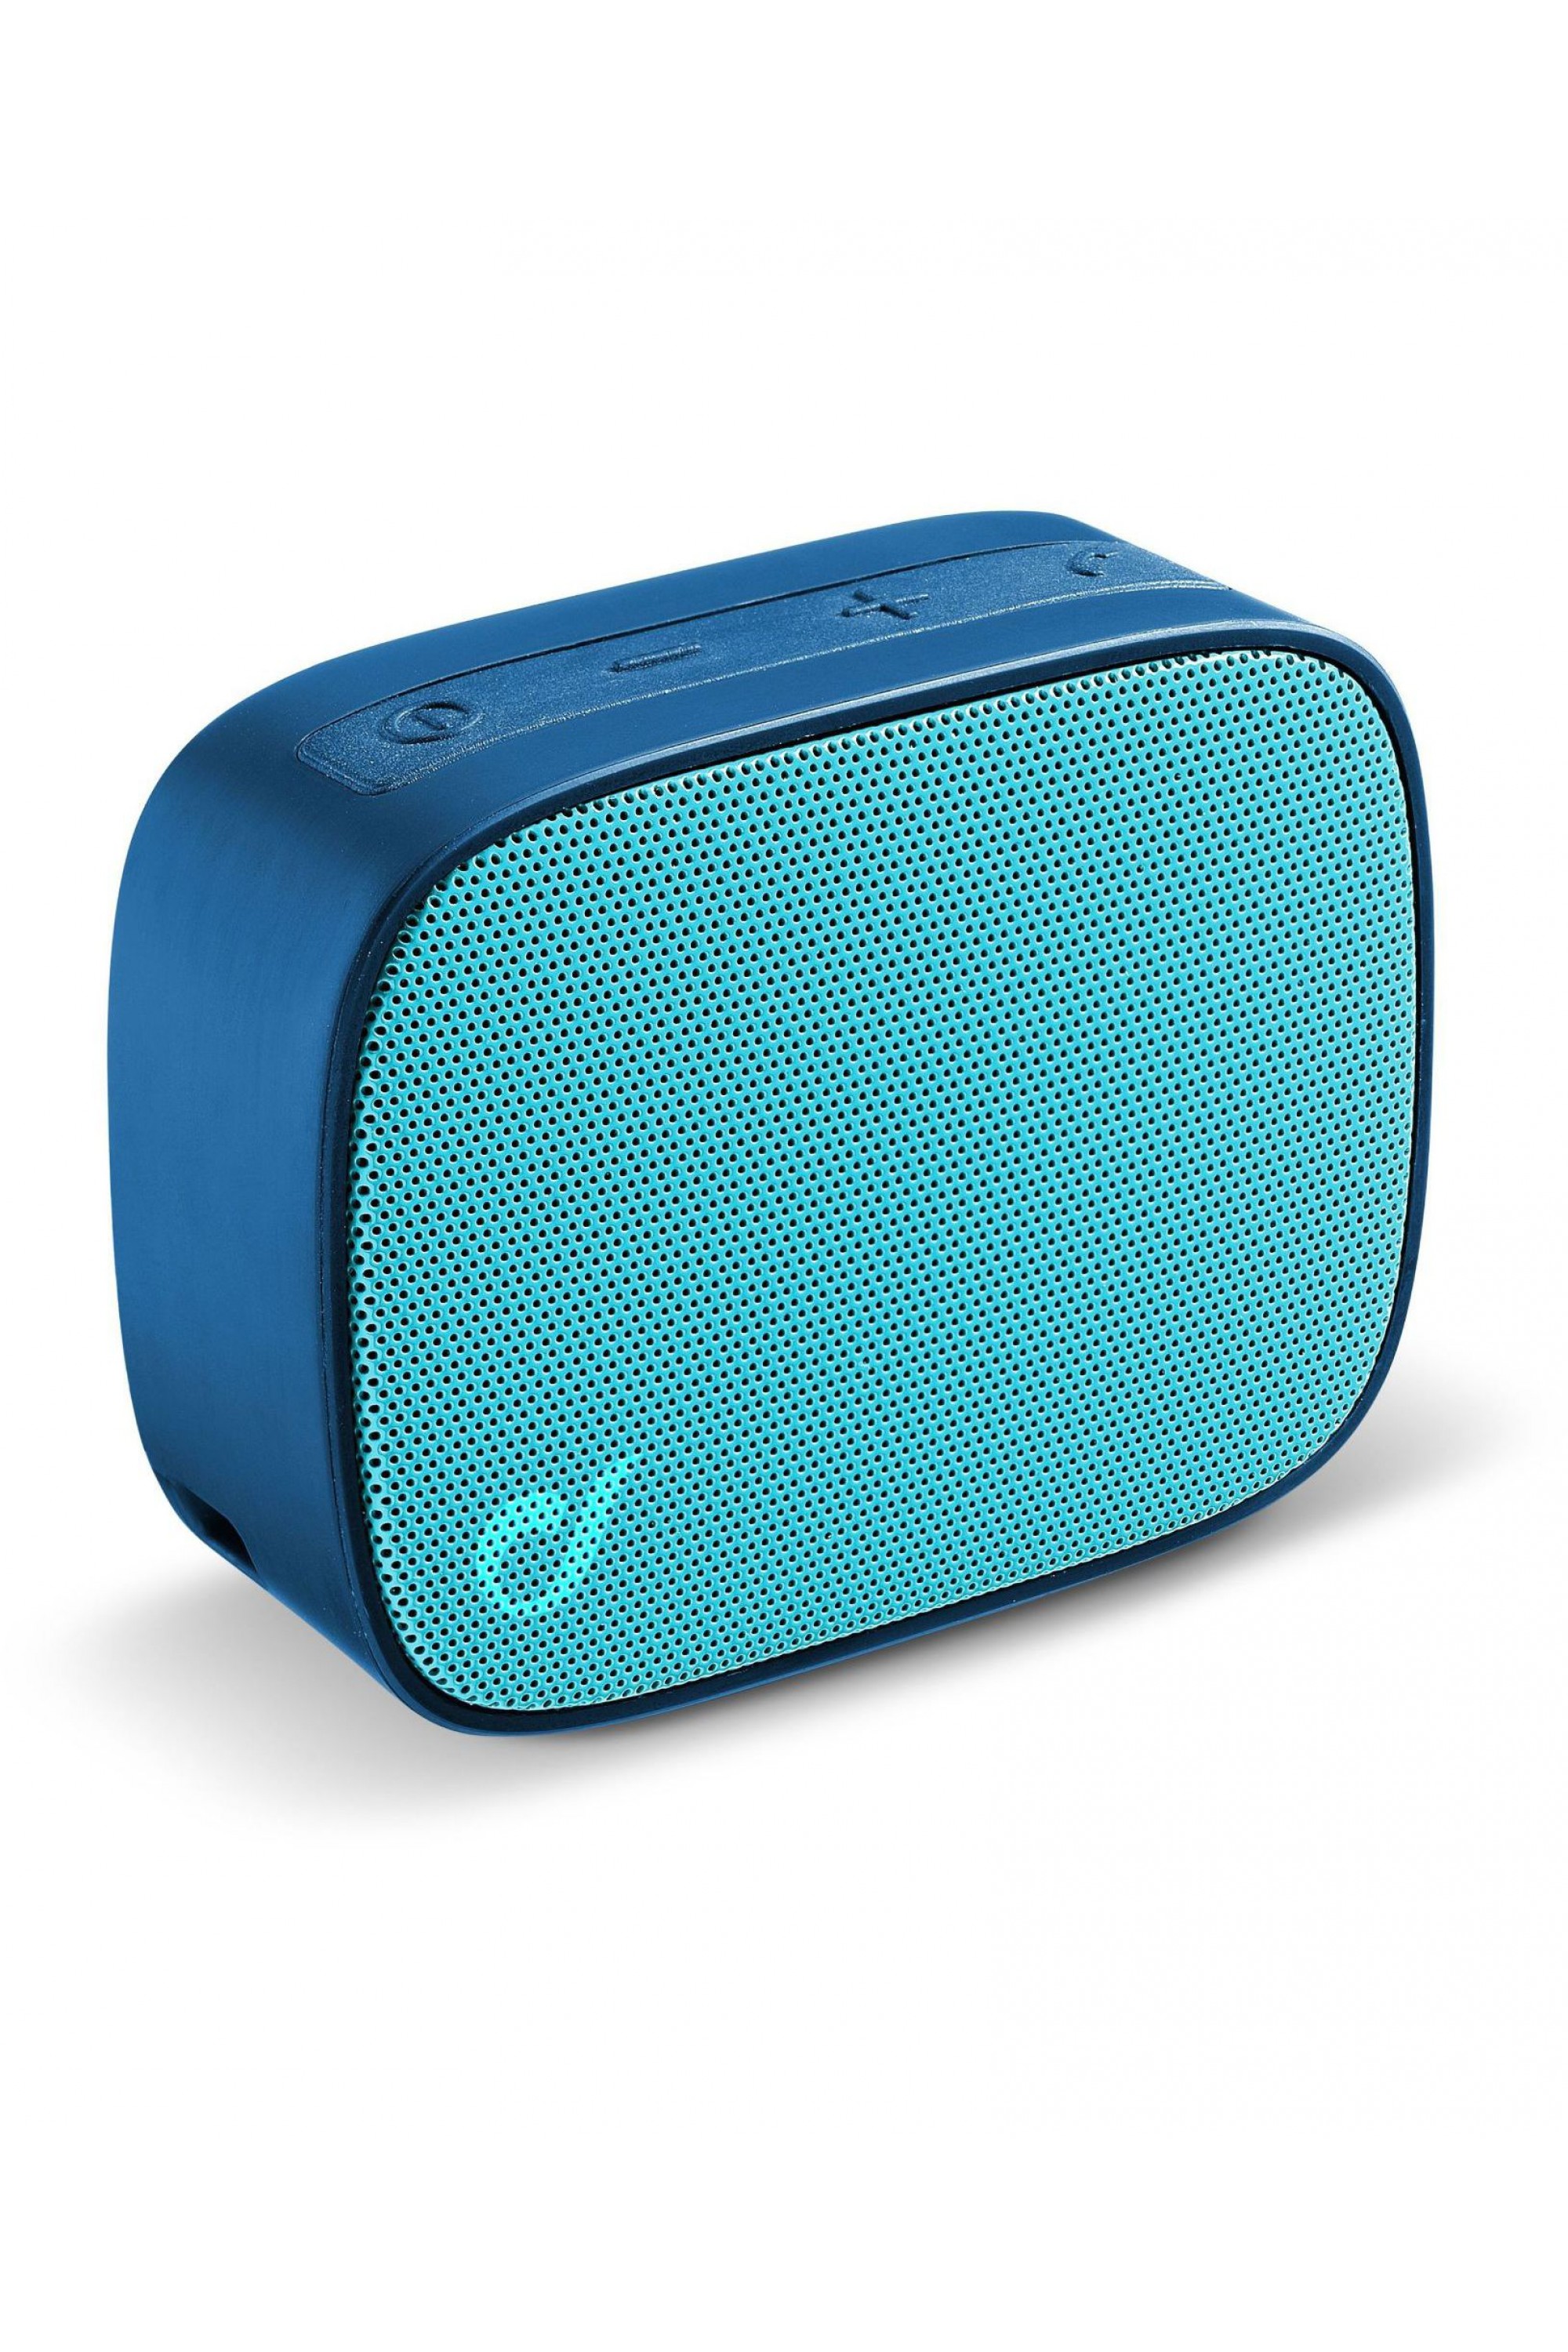 Cellularline Fizzy Turquoise Bluetooth Portable Speakers |